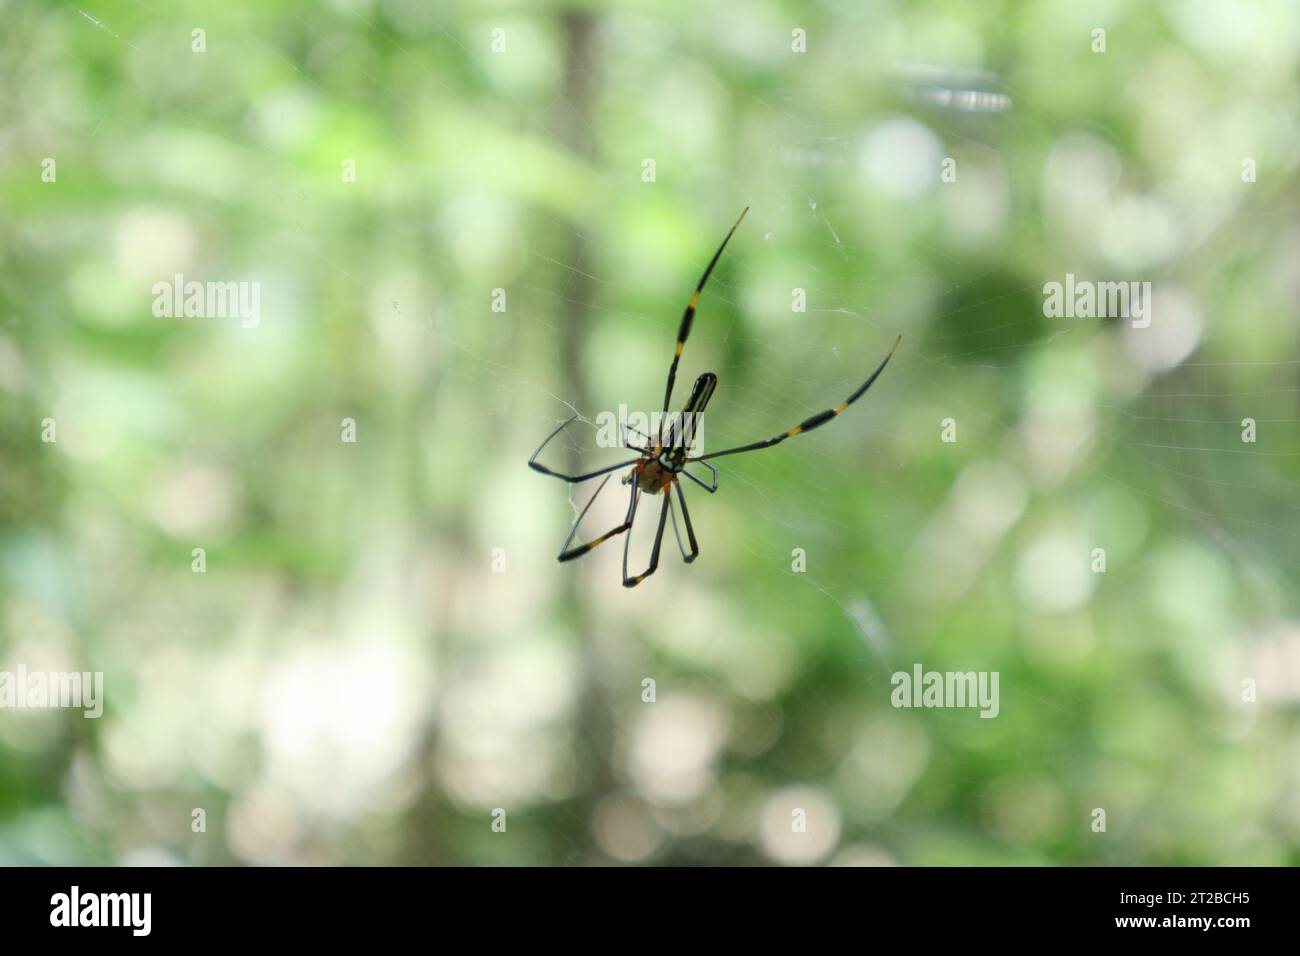 View from behind of a Giant golden orb weaver spider catching a flying insect in soft focus Stock Photo